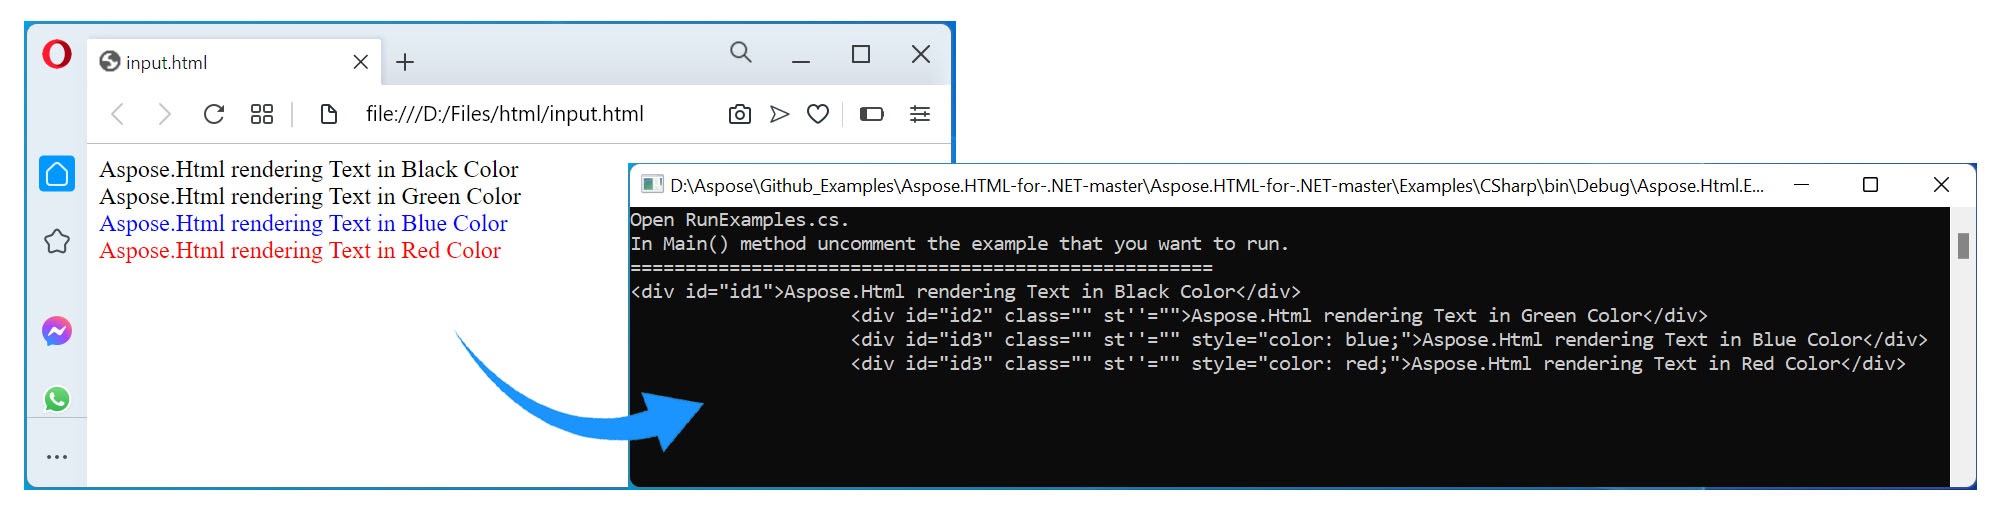 Read and Extract HTML using C#.